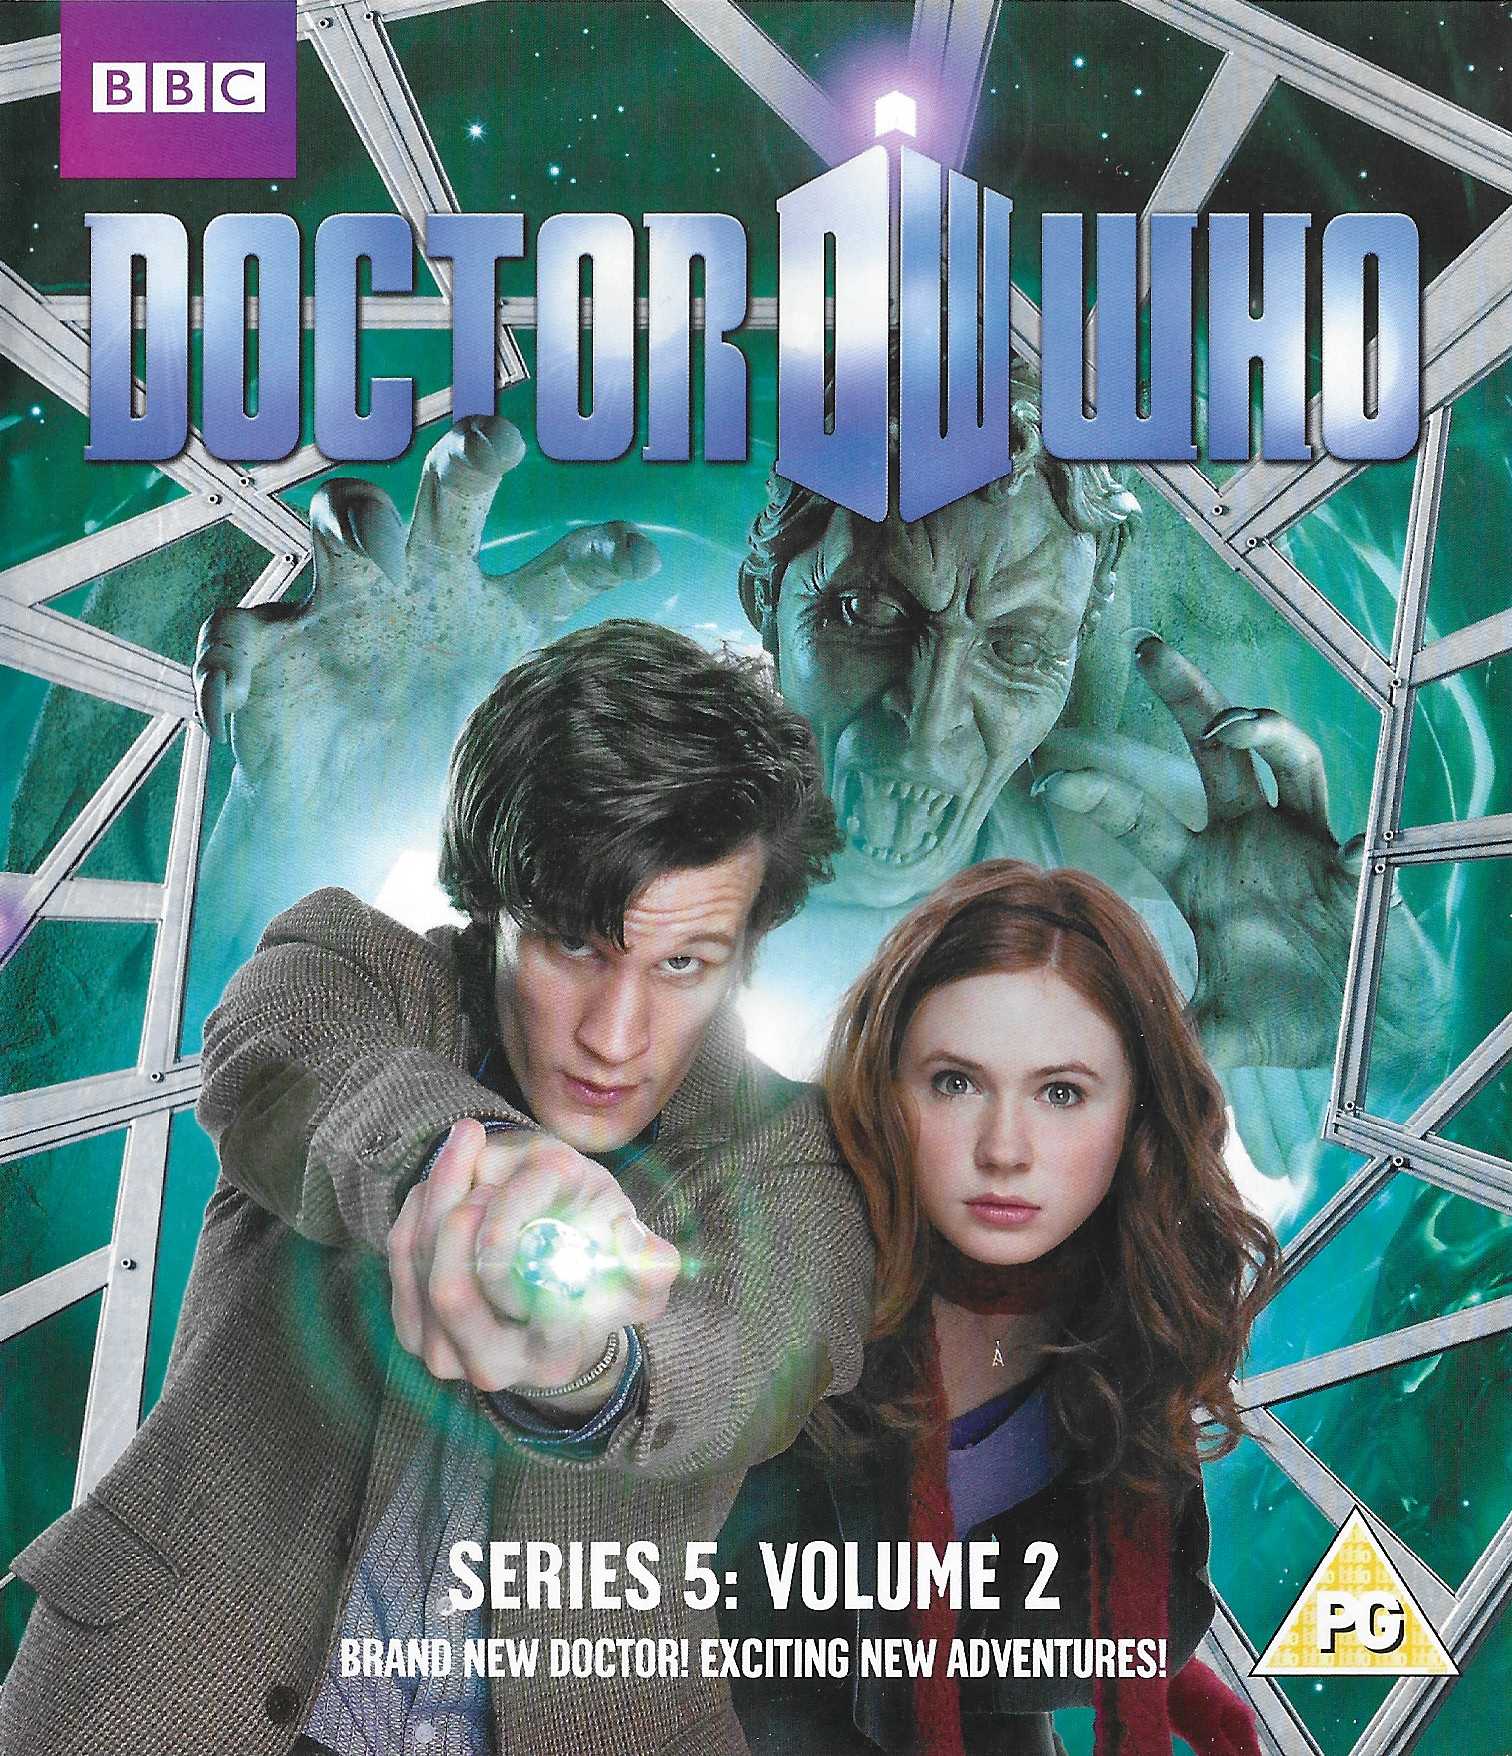 Picture of BBCBD 0083 Doctor Who - Series 5, volume 2 by artist Steven Moffat / Toby Whithouse from the BBC blu-rays - Records and Tapes library